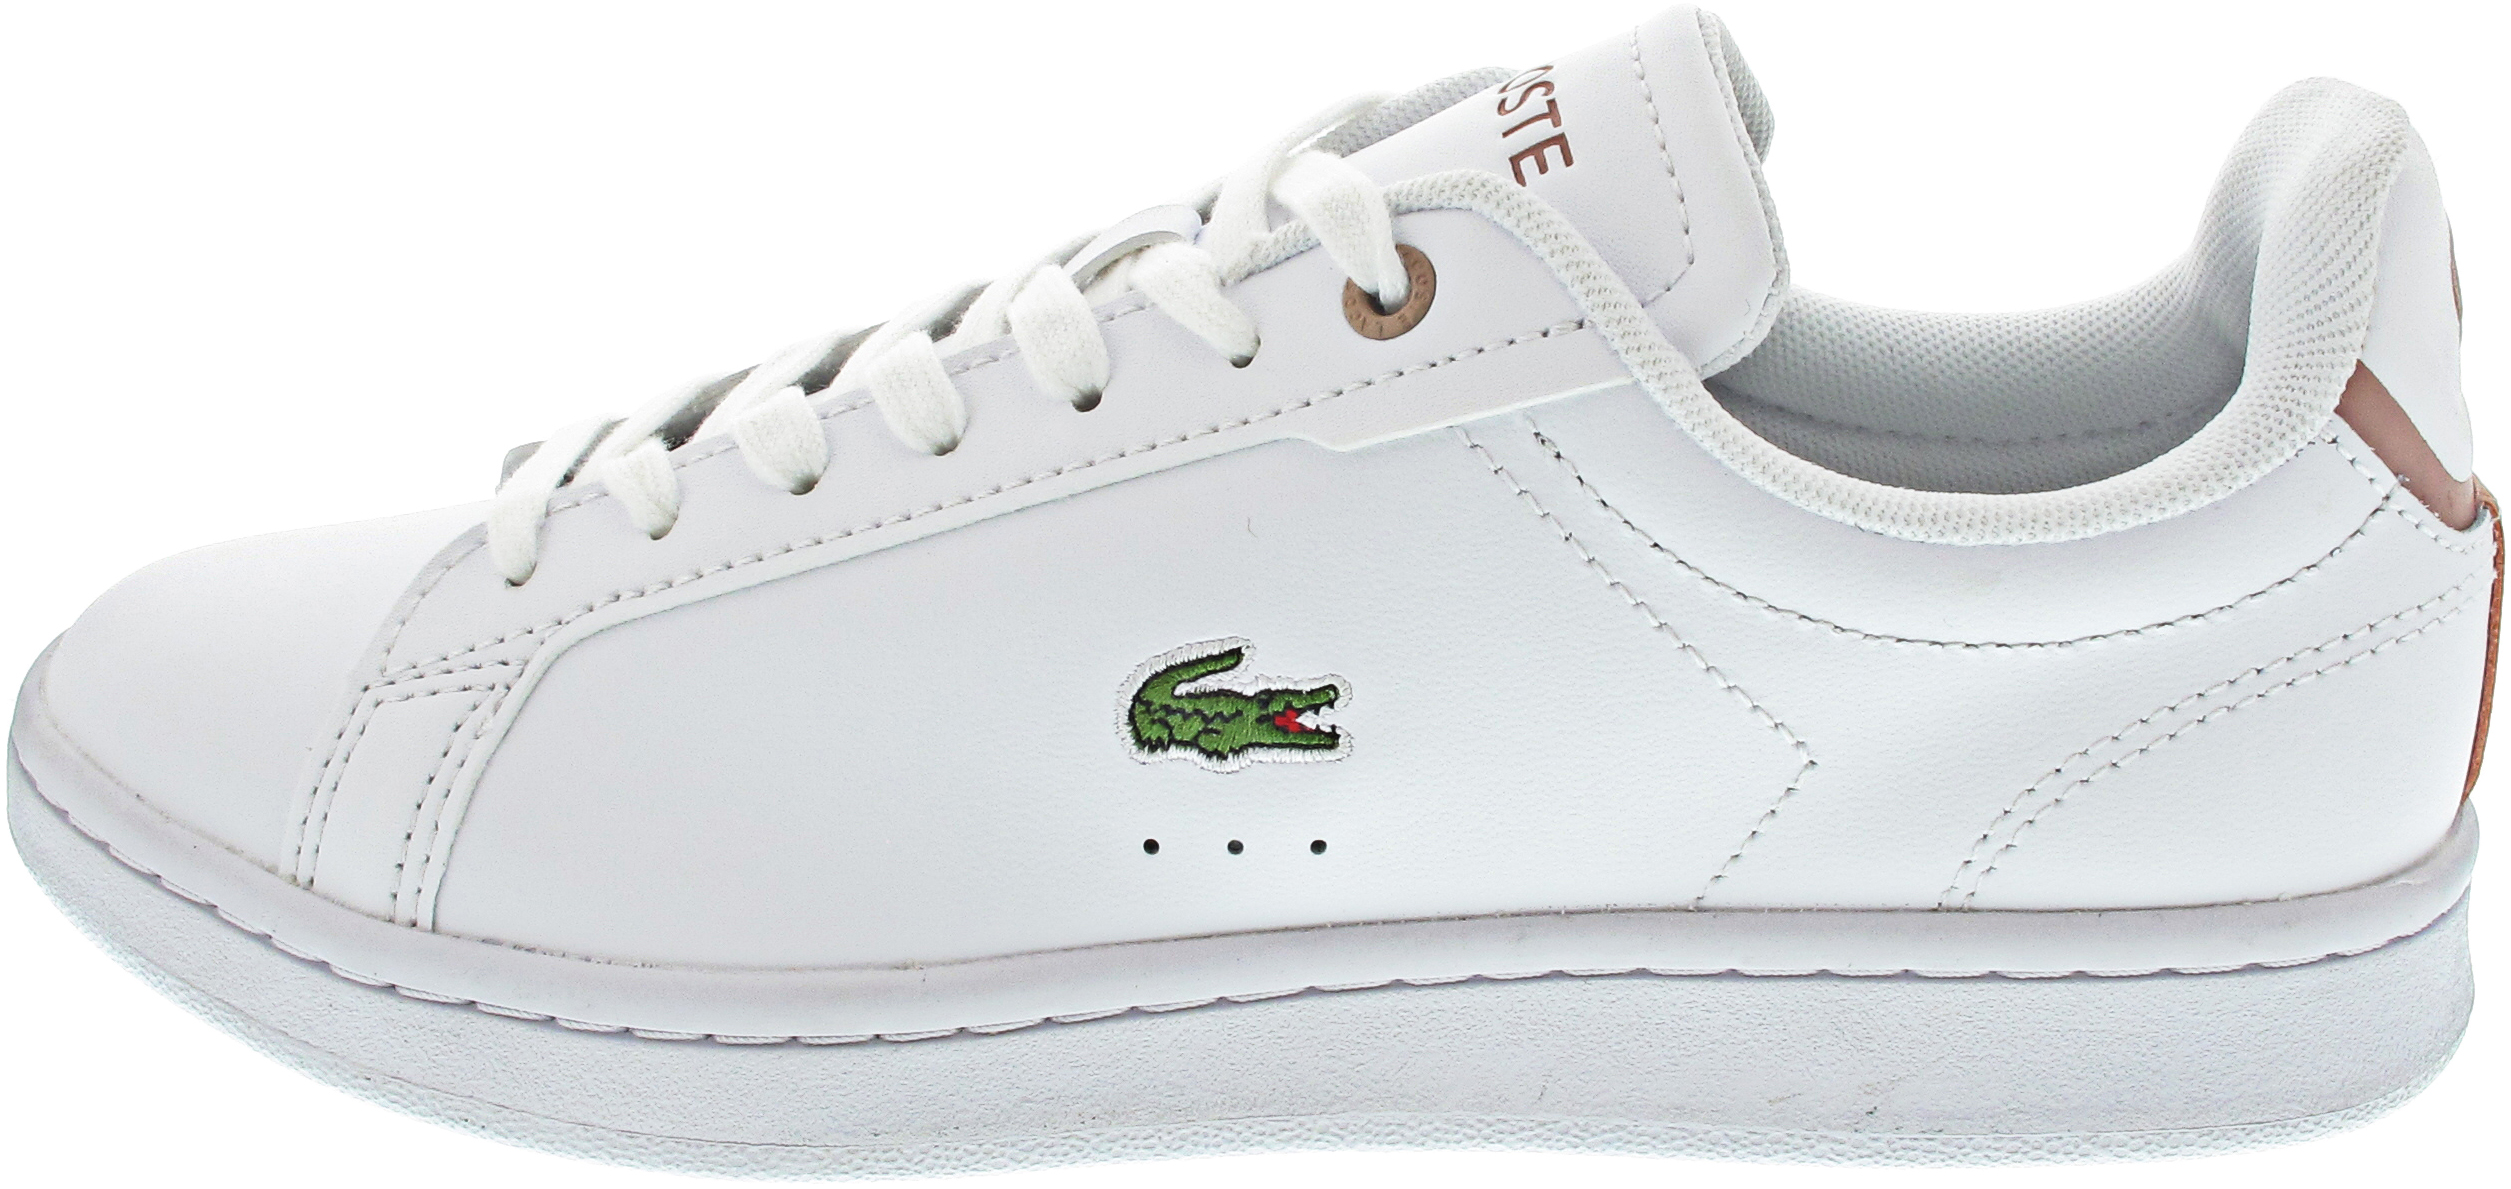 Lacoste Carnaby Pro BL Leather To